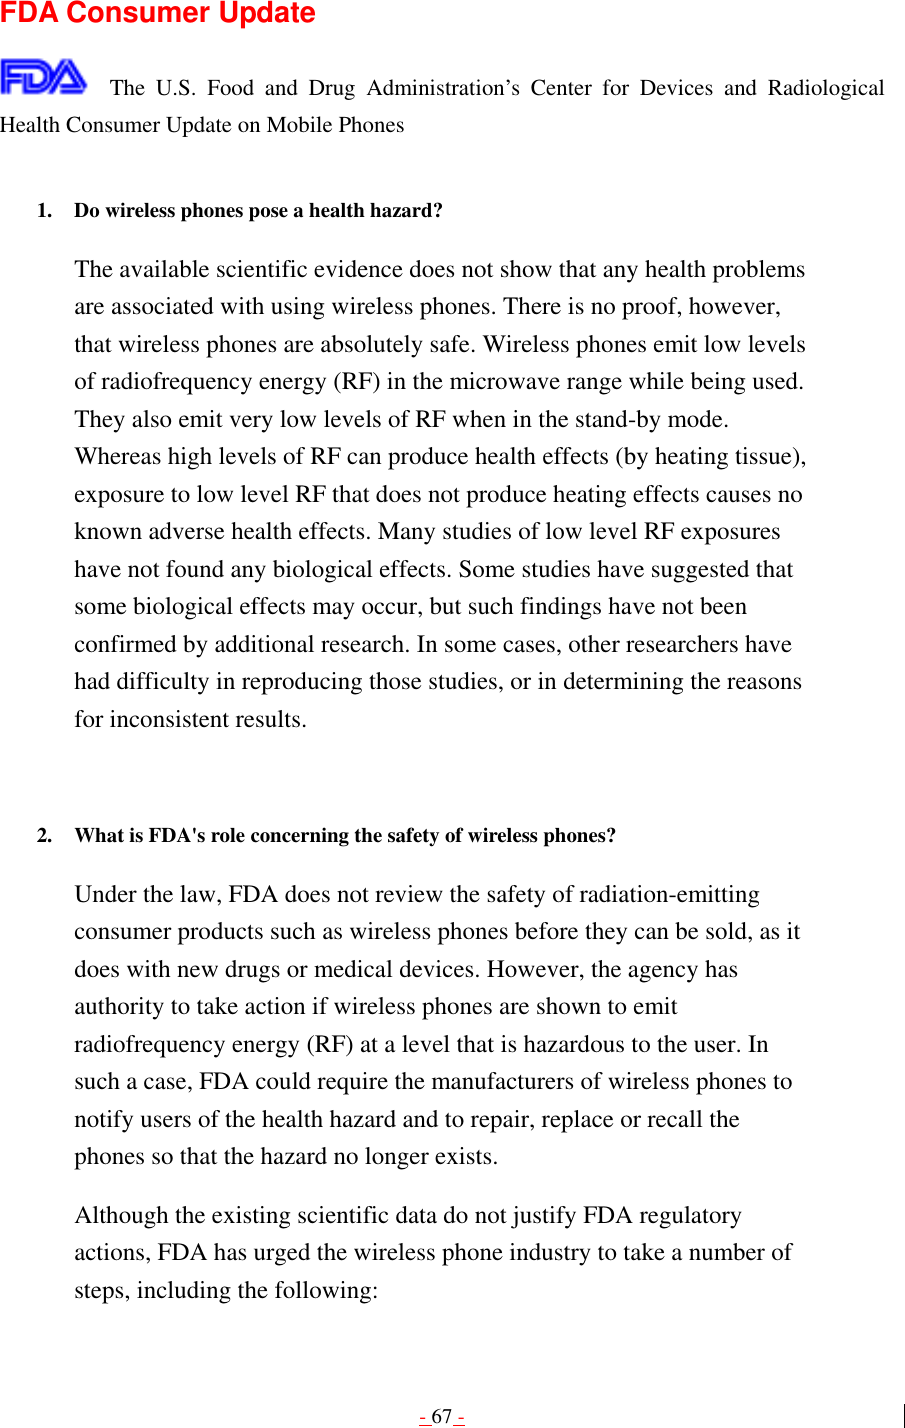 - 67 -  FDA Consumer Update  The U.S. Food and Drug Administration’s Center for Devices and Radiological Health Consumer Update on Mobile Phones  1.  Do wireless phones pose a health hazard?   The available scientific evidence does not show that any health problems are associated with using wireless phones. There is no proof, however, that wireless phones are absolutely safe. Wireless phones emit low levels of radiofrequency energy (RF) in the microwave range while being used. They also emit very low levels of RF when in the stand-by mode. Whereas high levels of RF can produce health effects (by heating tissue), exposure to low level RF that does not produce heating effects causes no known adverse health effects. Many studies of low level RF exposures have not found any biological effects. Some studies have suggested that some biological effects may occur, but such findings have not been confirmed by additional research. In some cases, other researchers have had difficulty in reproducing those studies, or in determining the reasons for inconsistent results.   2.  What is FDA&apos;s role concerning the safety of wireless phones?   Under the law, FDA does not review the safety of radiation-emitting consumer products such as wireless phones before they can be sold, as it does with new drugs or medical devices. However, the agency has authority to take action if wireless phones are shown to emit radiofrequency energy (RF) at a level that is hazardous to the user. In such a case, FDA could require the manufacturers of wireless phones to notify users of the health hazard and to repair, replace or recall the phones so that the hazard no longer exists. Although the existing scientific data do not justify FDA regulatory actions, FDA has urged the wireless phone industry to take a number of steps, including the following: 